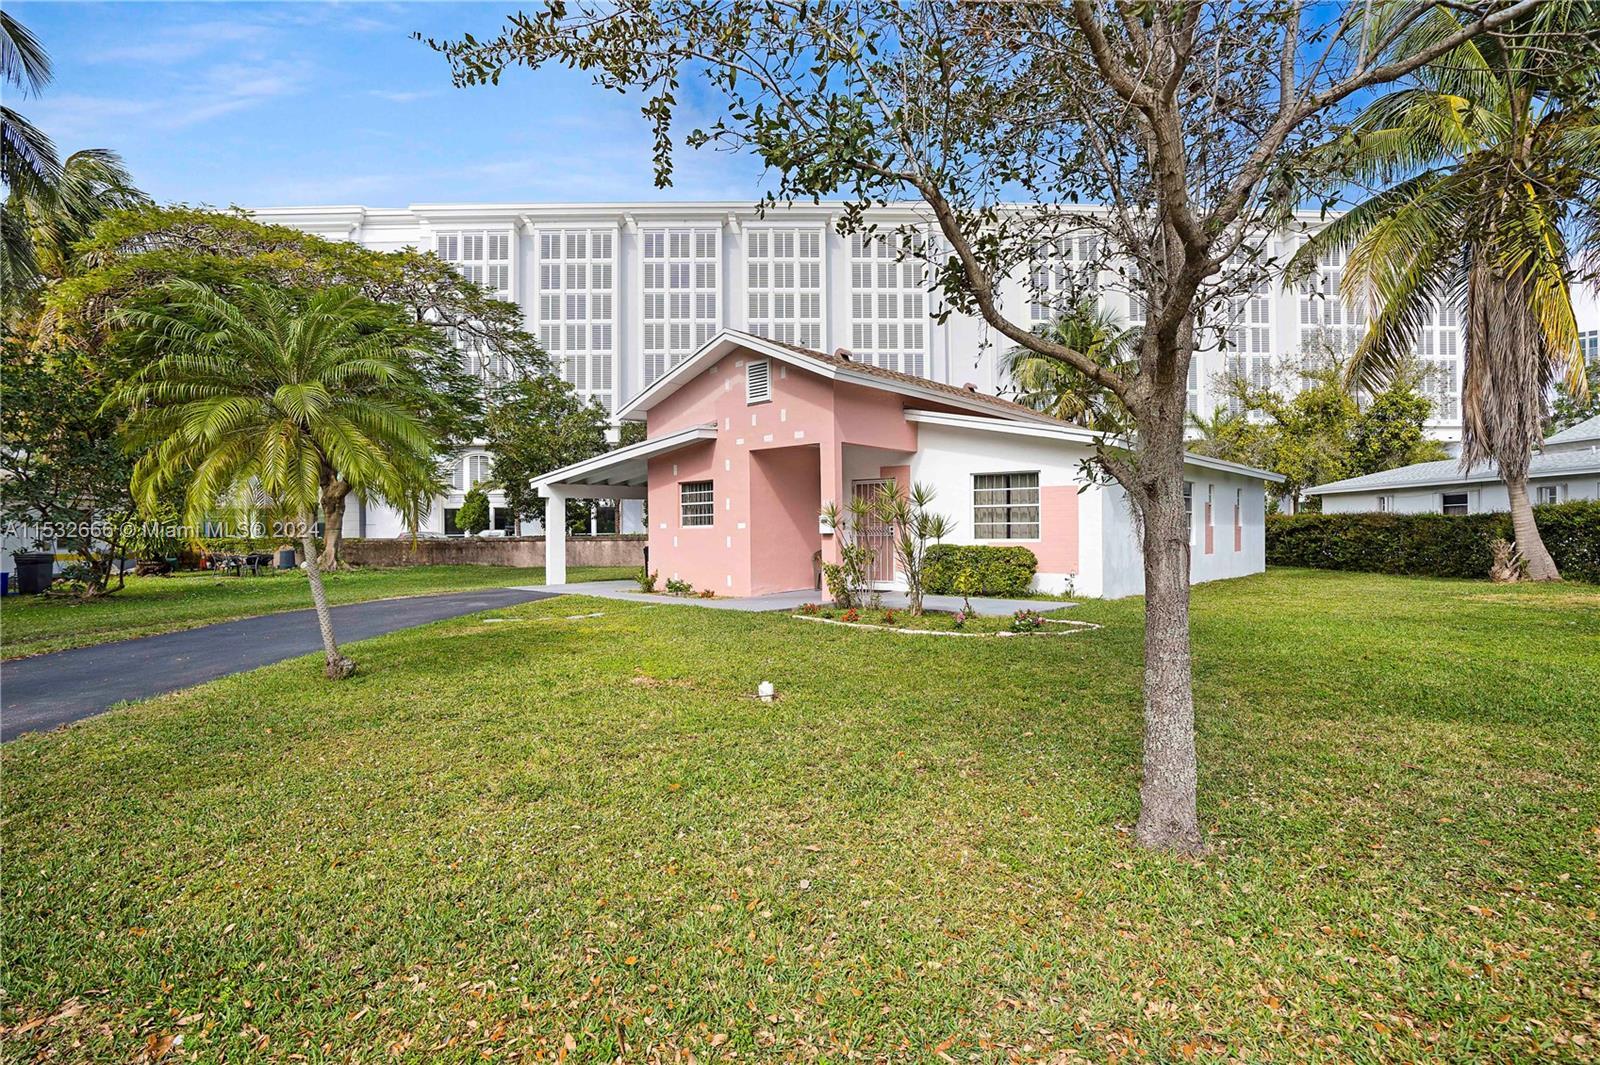 Photo of 135 George Allen Ave in Coral Gables, FL